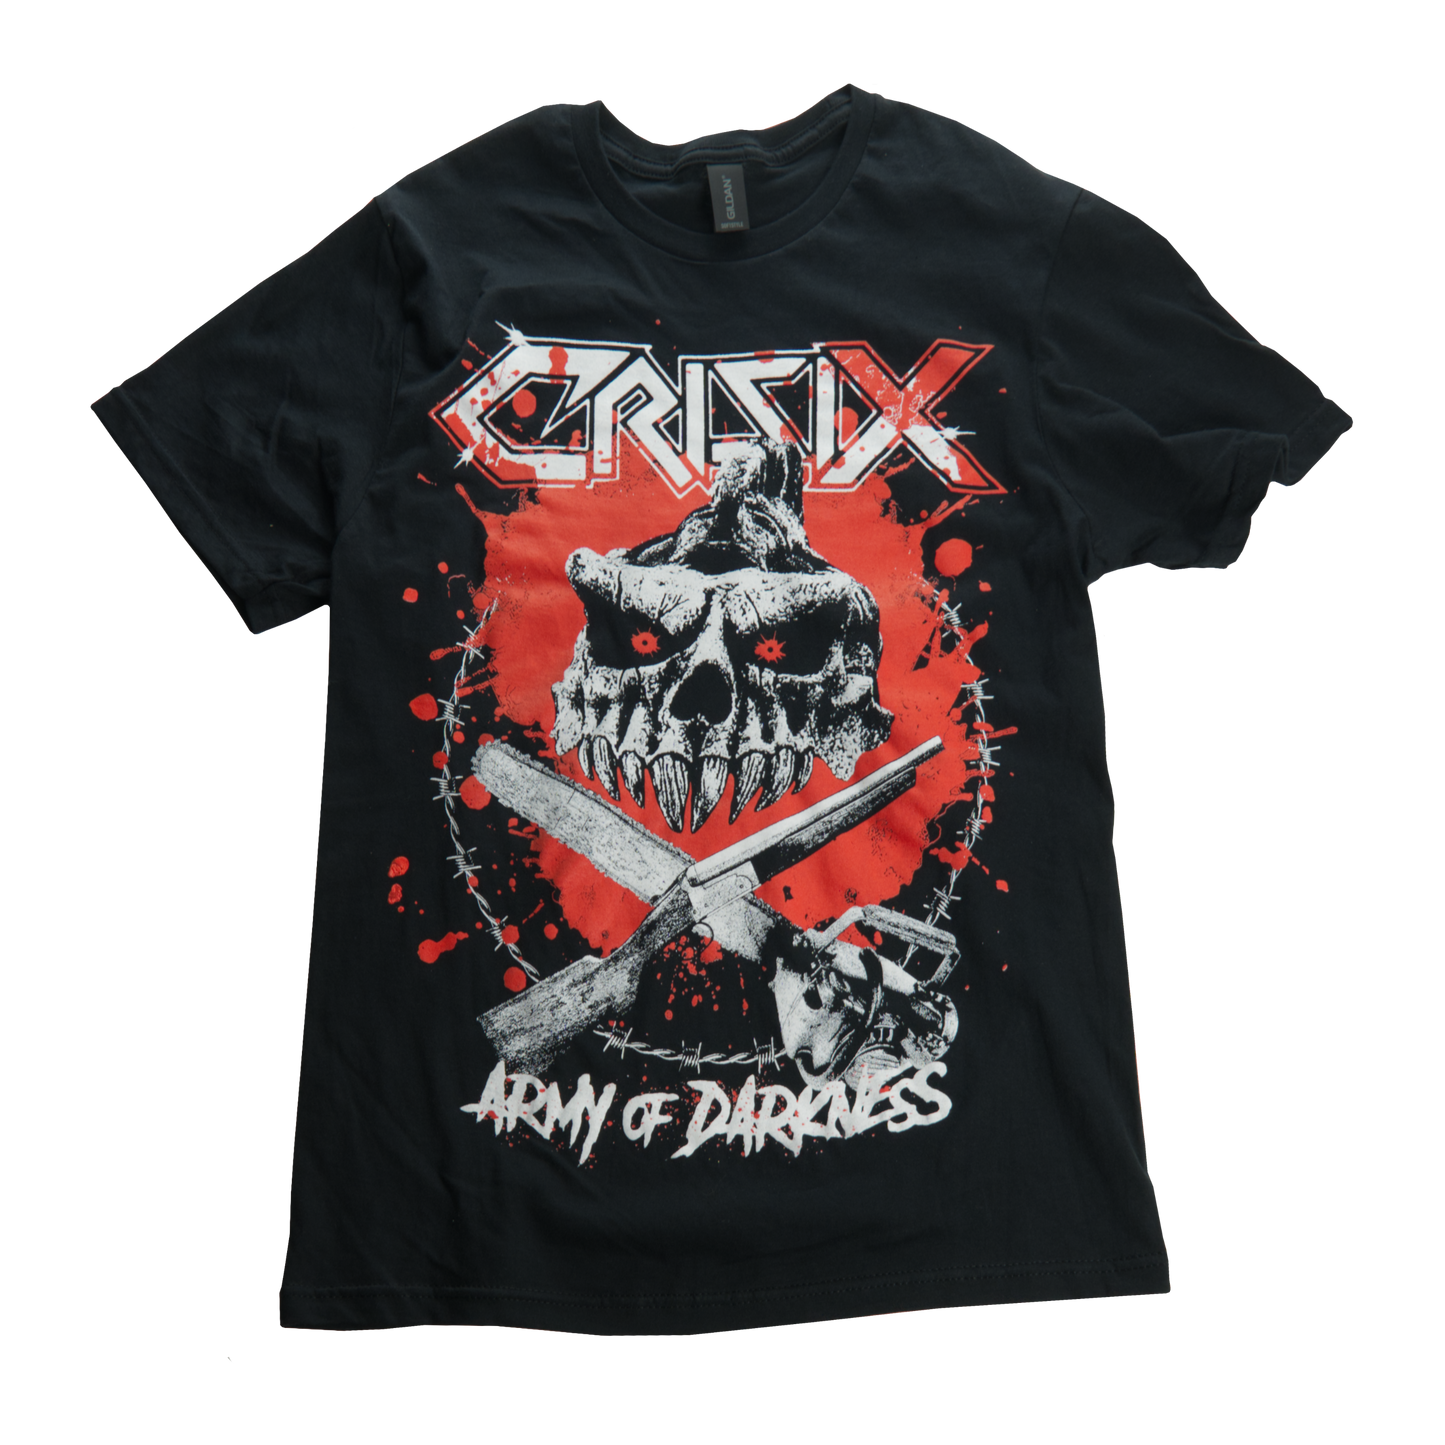 PRE-ORDER Army of Darkness Black T-shirt